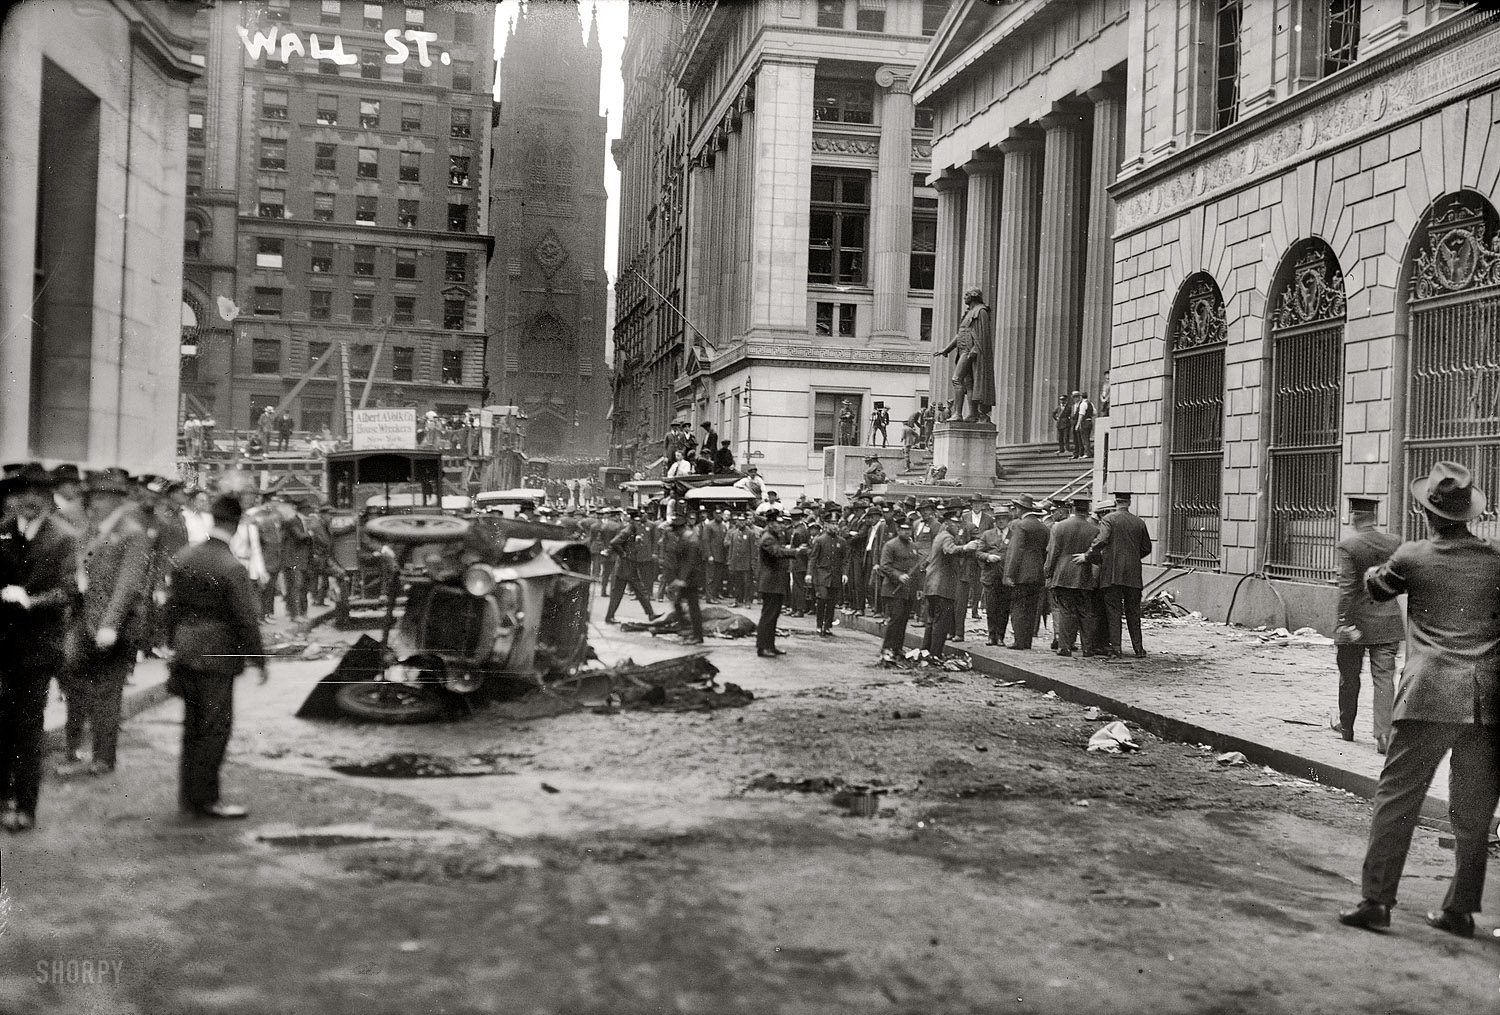 "Wall Street bomb." Aftermath of the explosion that killed dozens of people in New York's financial district on September 16, 1920, when a horse wagon loaded with dynamite and iron sash weights blew up in front of the J.P. Morgan bank at 23 Wall Street. The attack, which was attributed to Italian anarchists, was never solved. 5x7 glass negative, George Grantham Bain Collection. View full size.